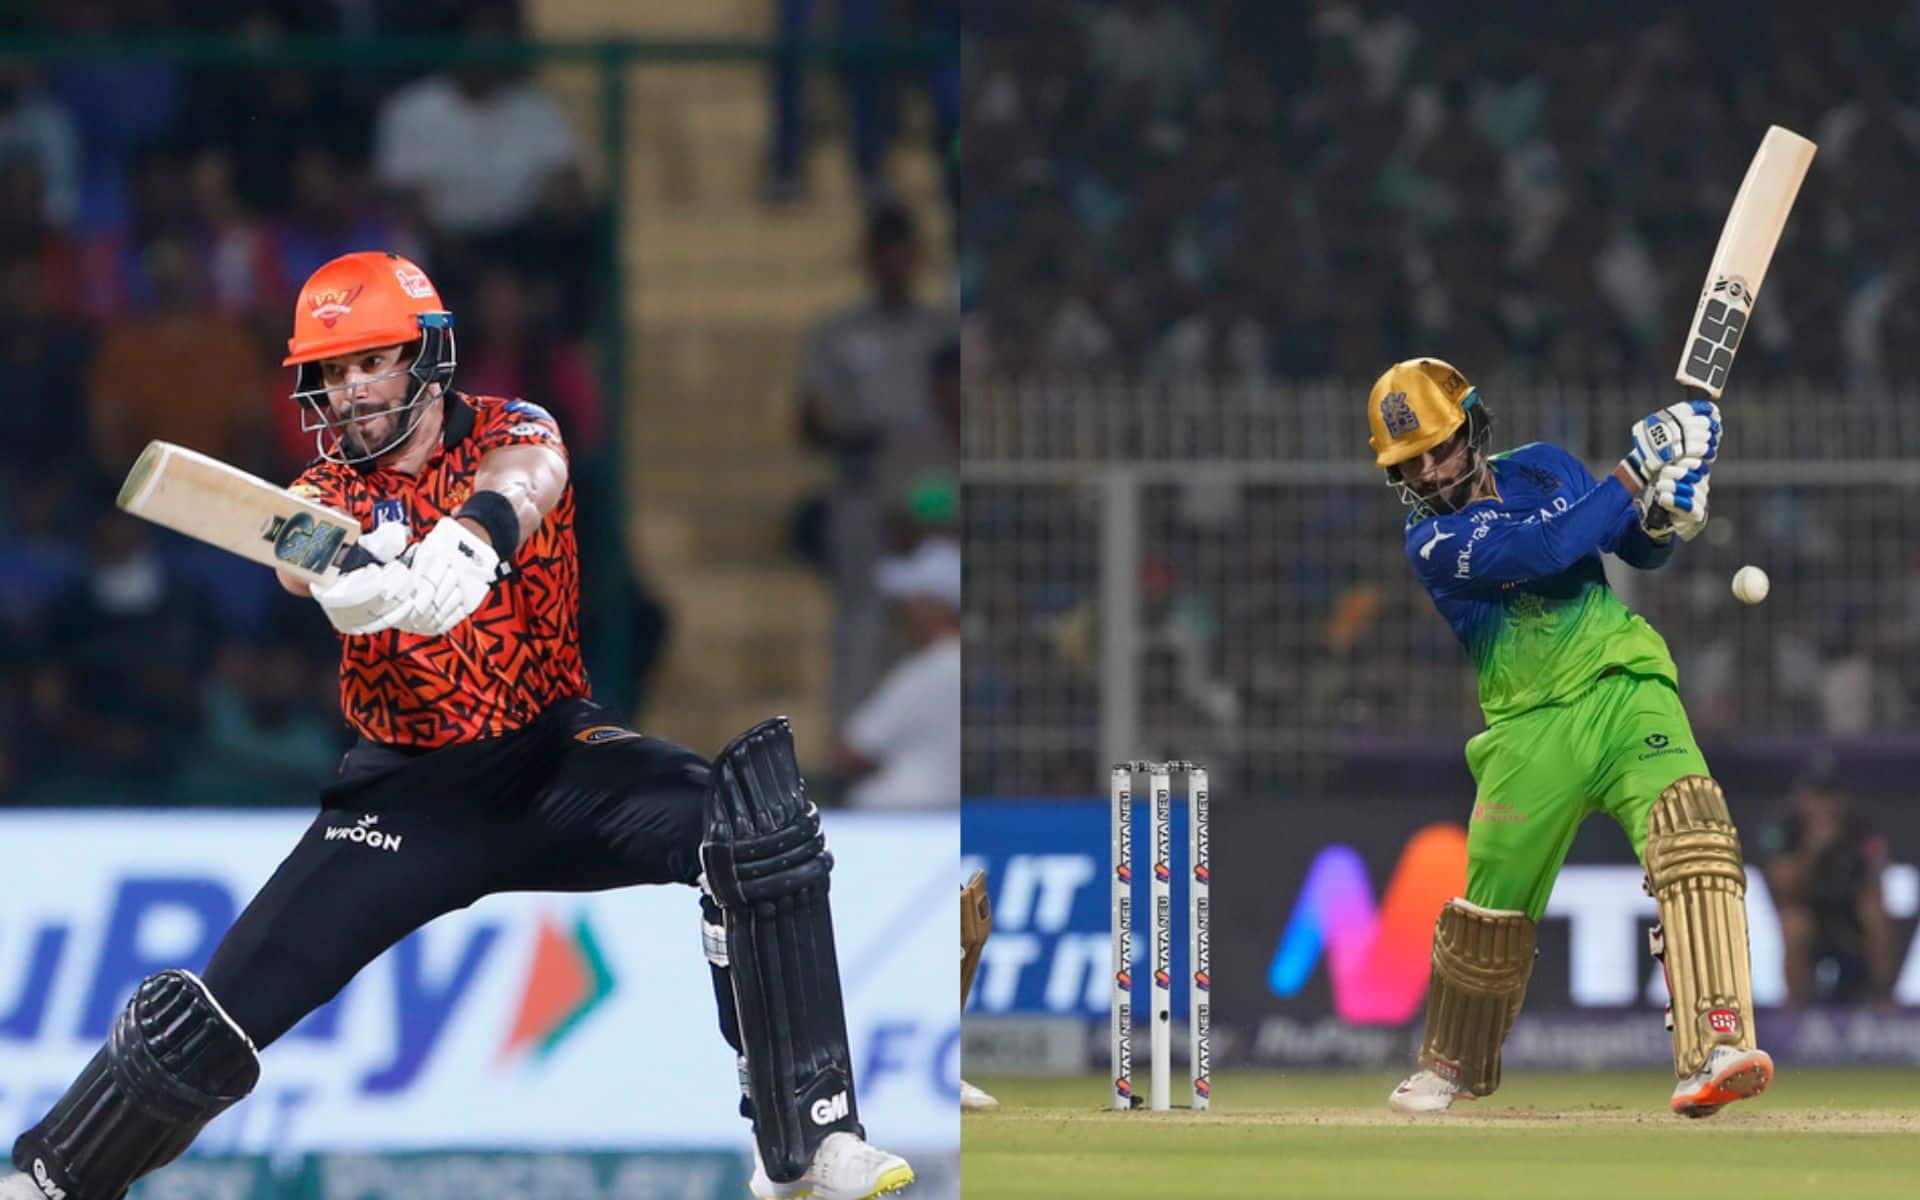 Aiden Markram and Rajat Patidar could be crucial for their teams in this match [AP Photos]